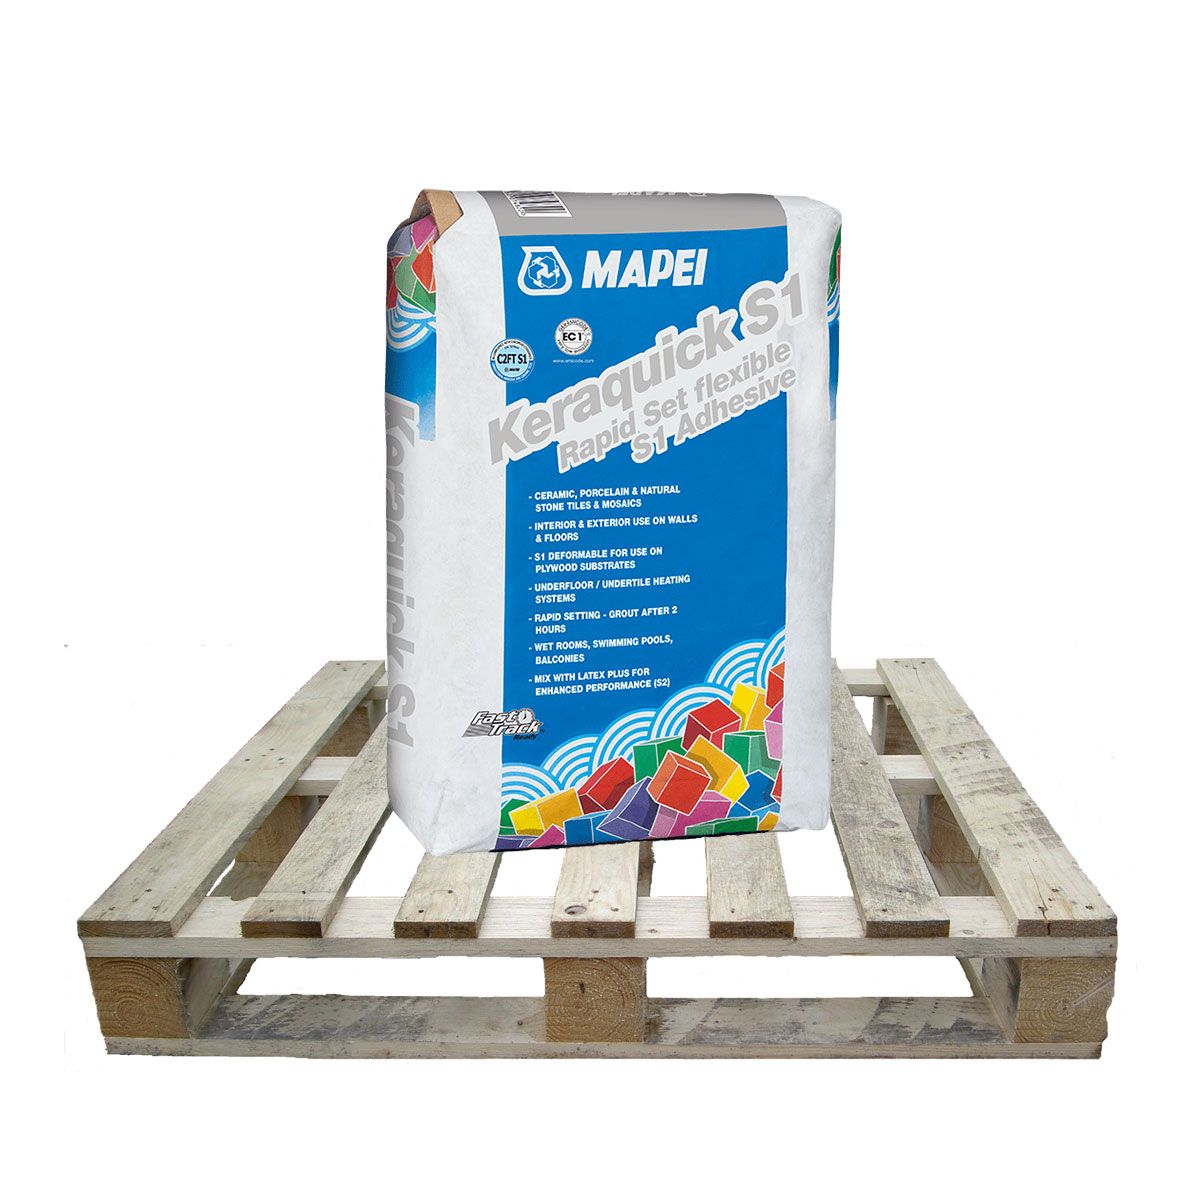 Mapei Keraquick S1 Adhesive 20kg Pallet of 48 Bags